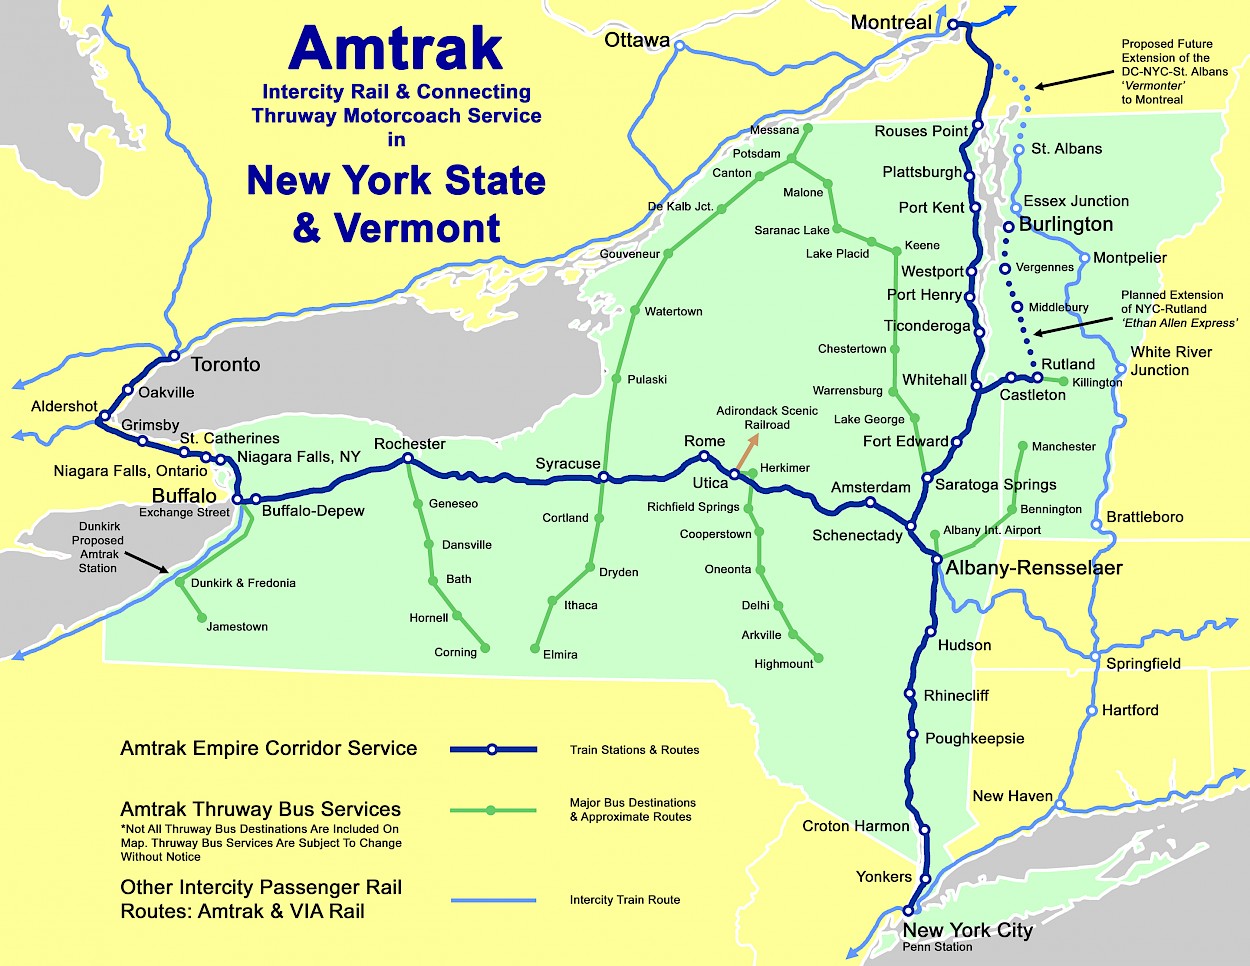 New York State Intercity Amtrak Services Map 05 2020.1250x0 Is 